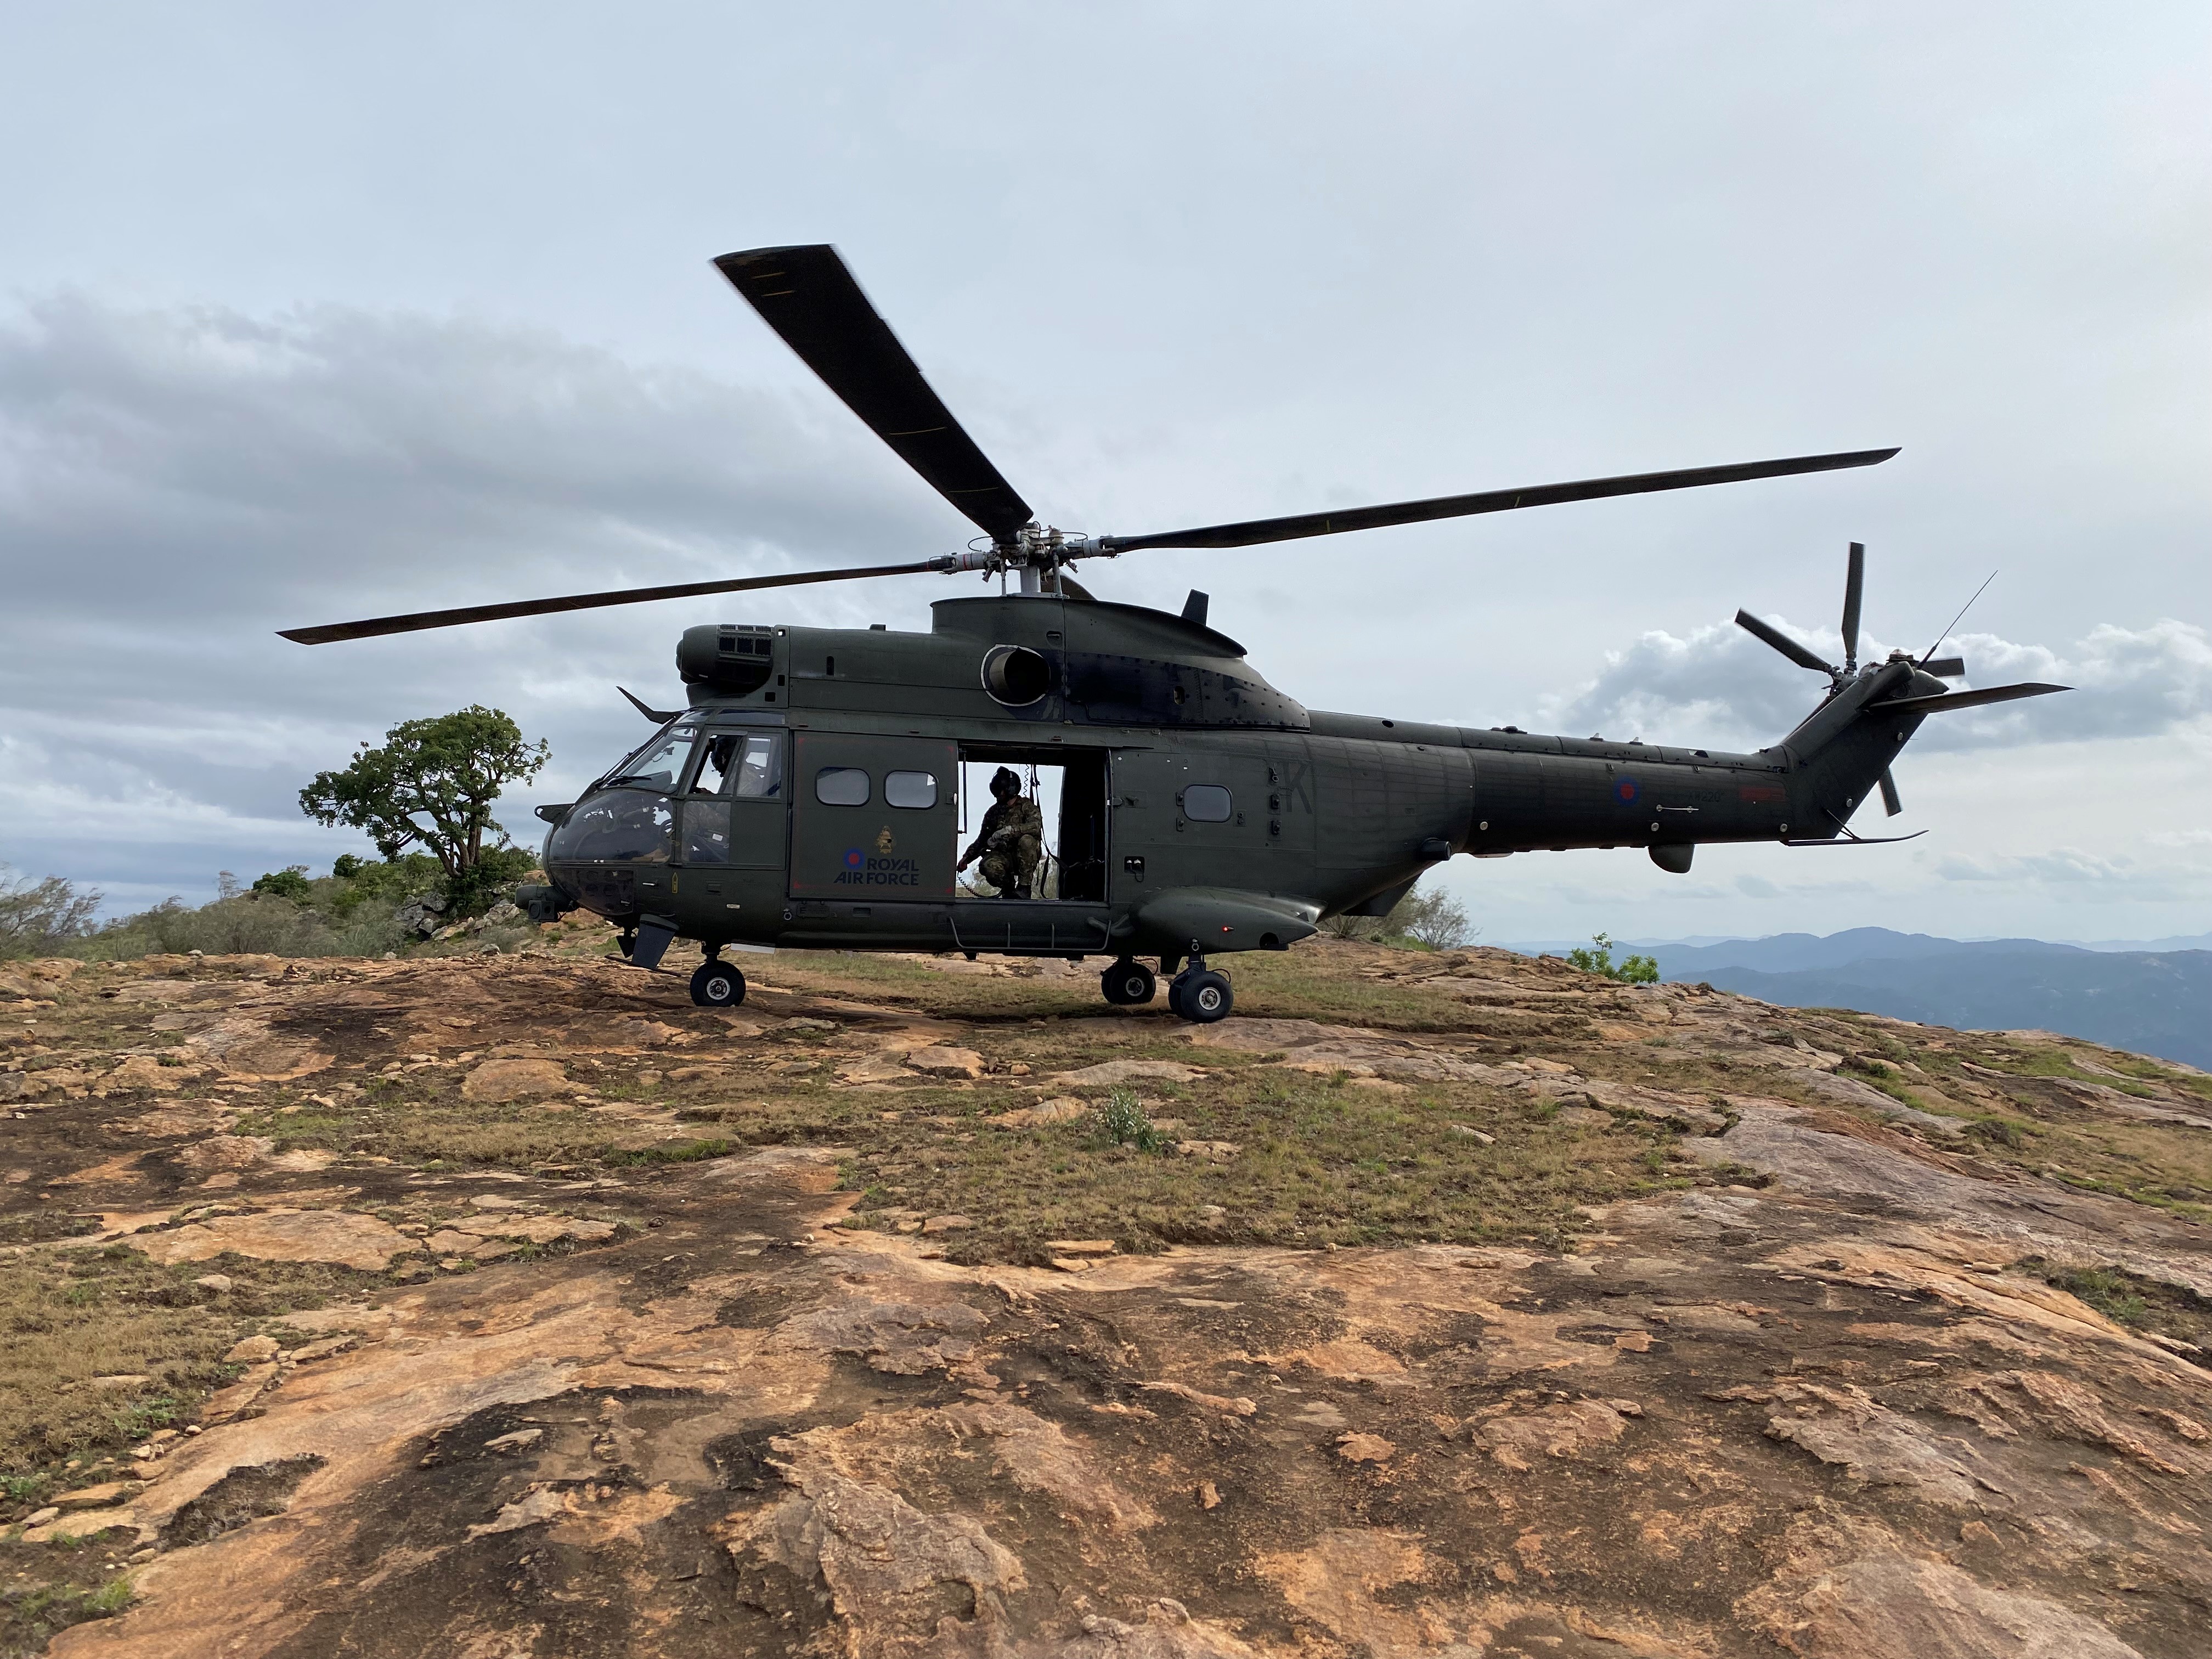 A Puma helicopter perches on top of a mountain in Kenya